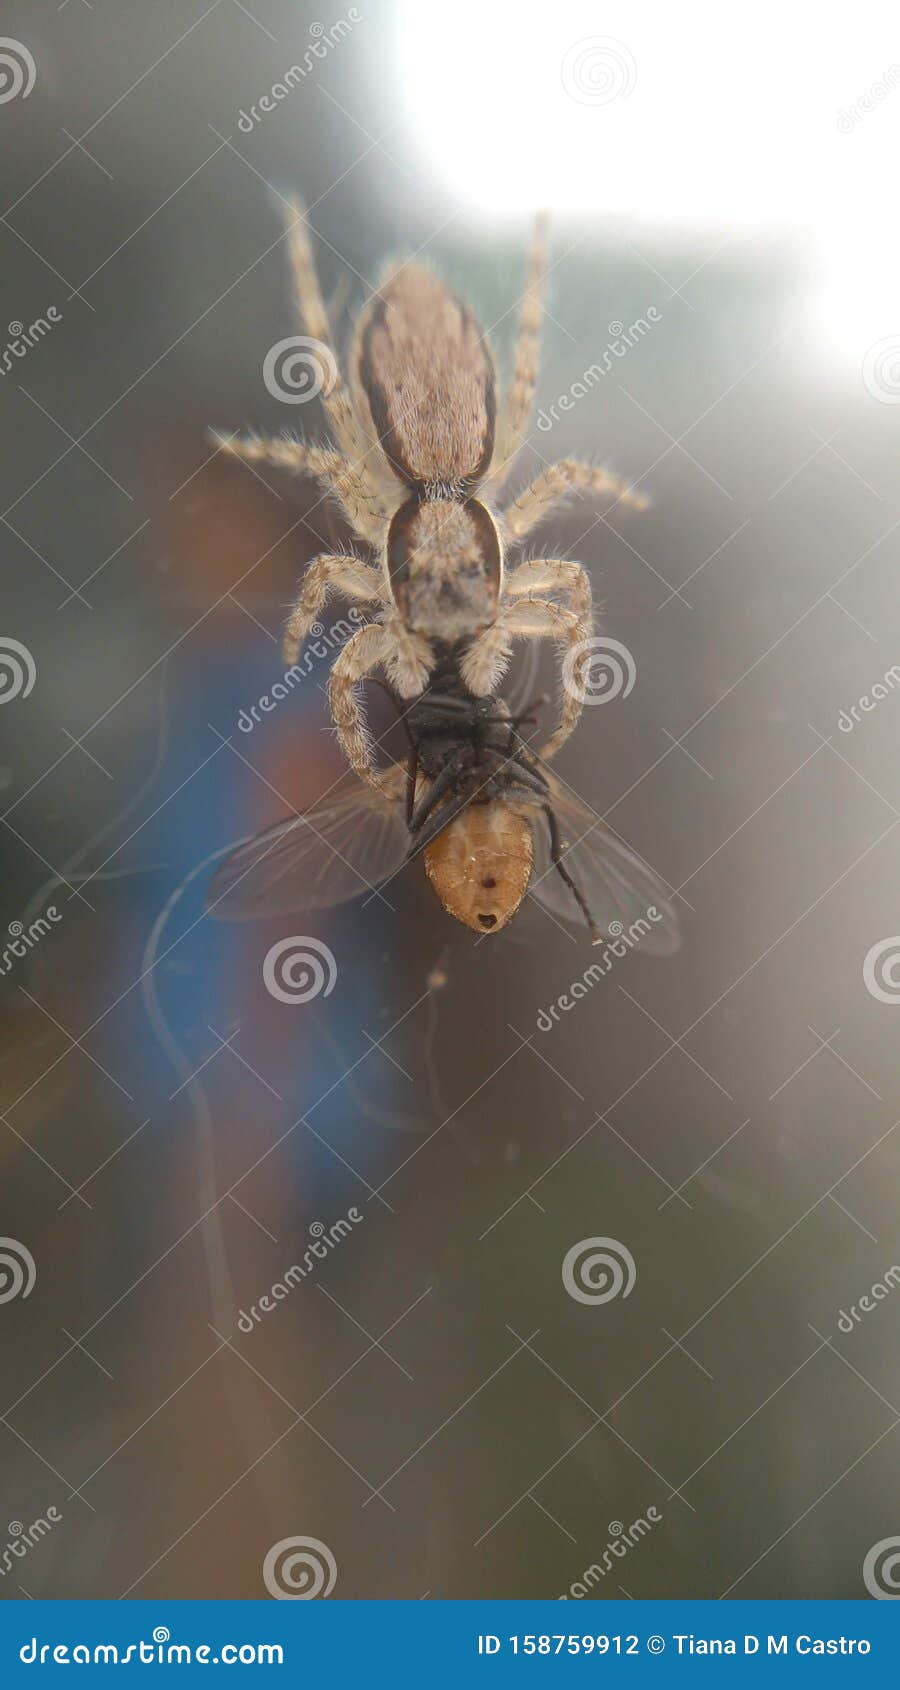 little spider eating fly on glass surface